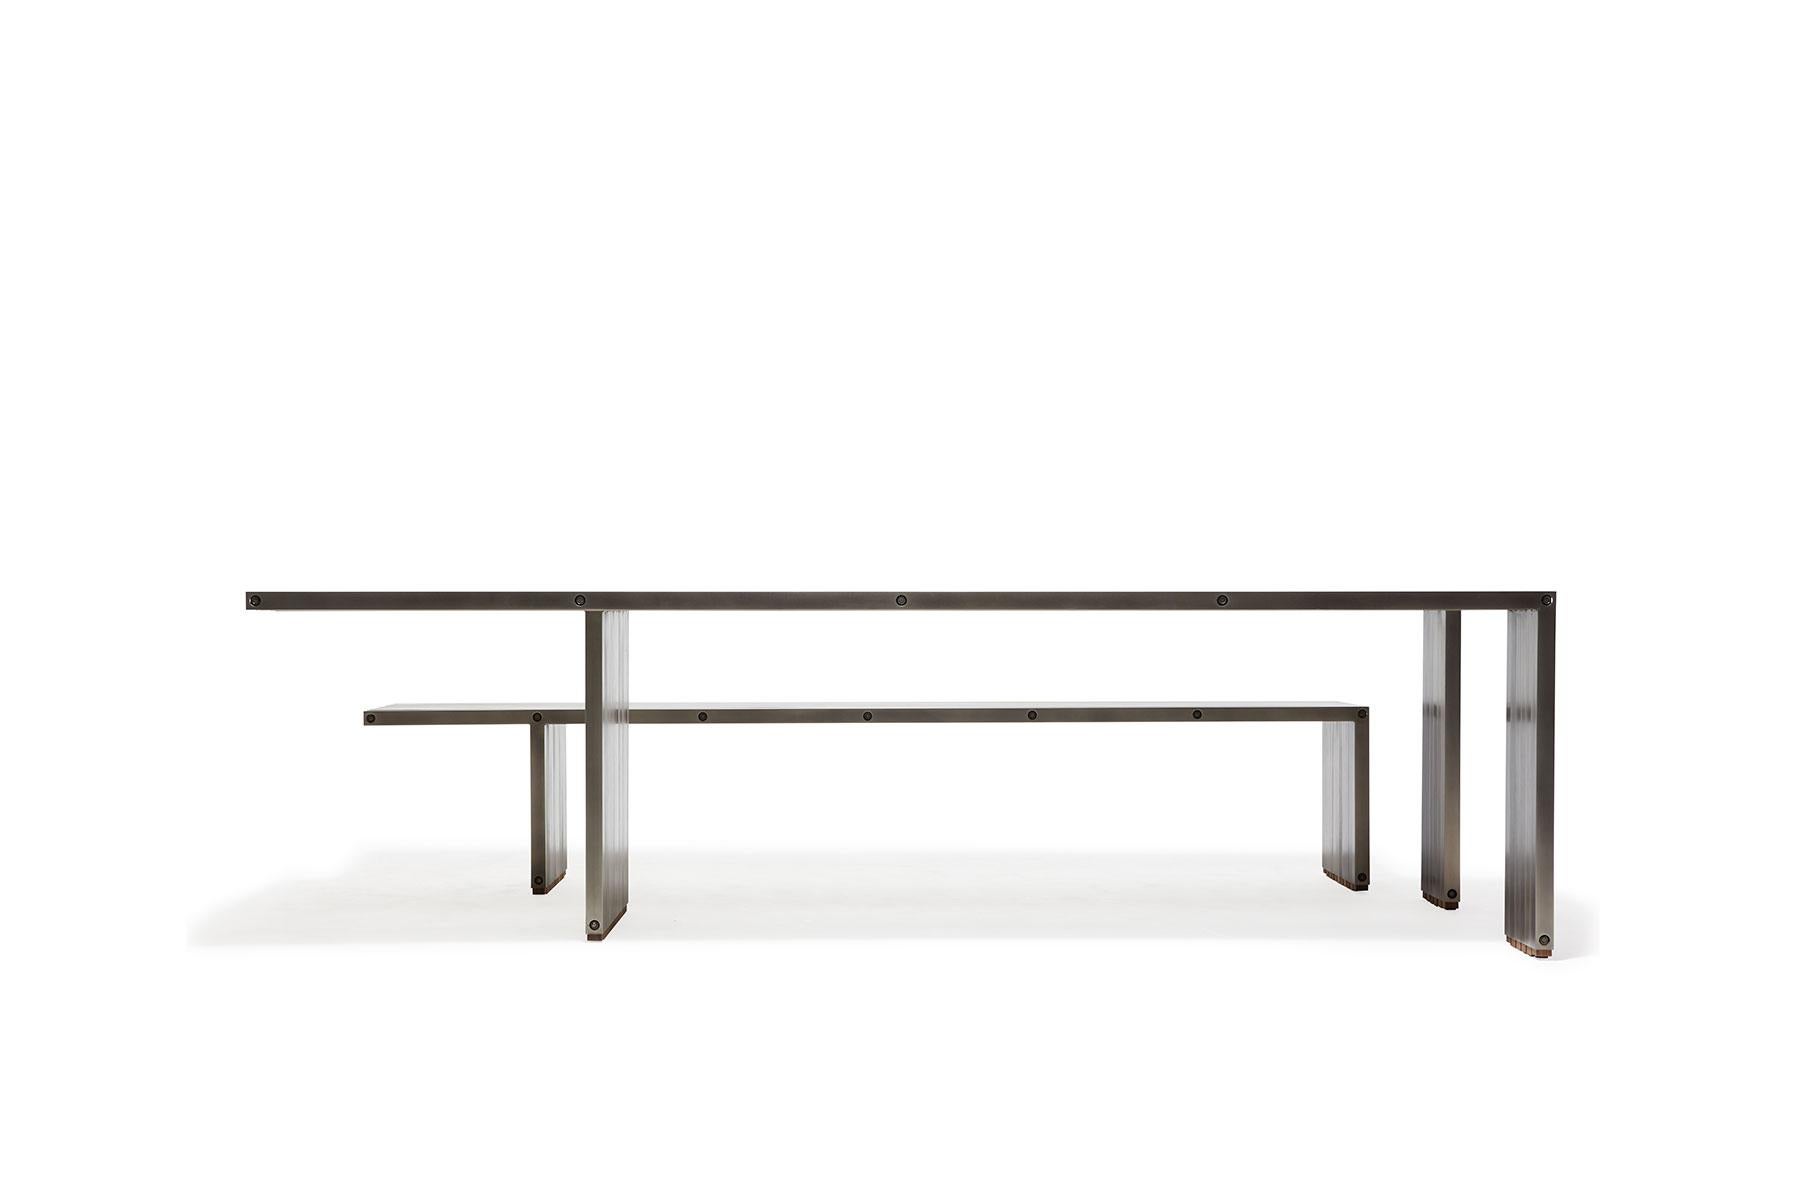 The compression table by Stephen Kenn is a celebration of simplicity and strength. The bars are held together without nails or welds, but through compression along steel rods. The Compression Table can be paired with the matching Compression Bench